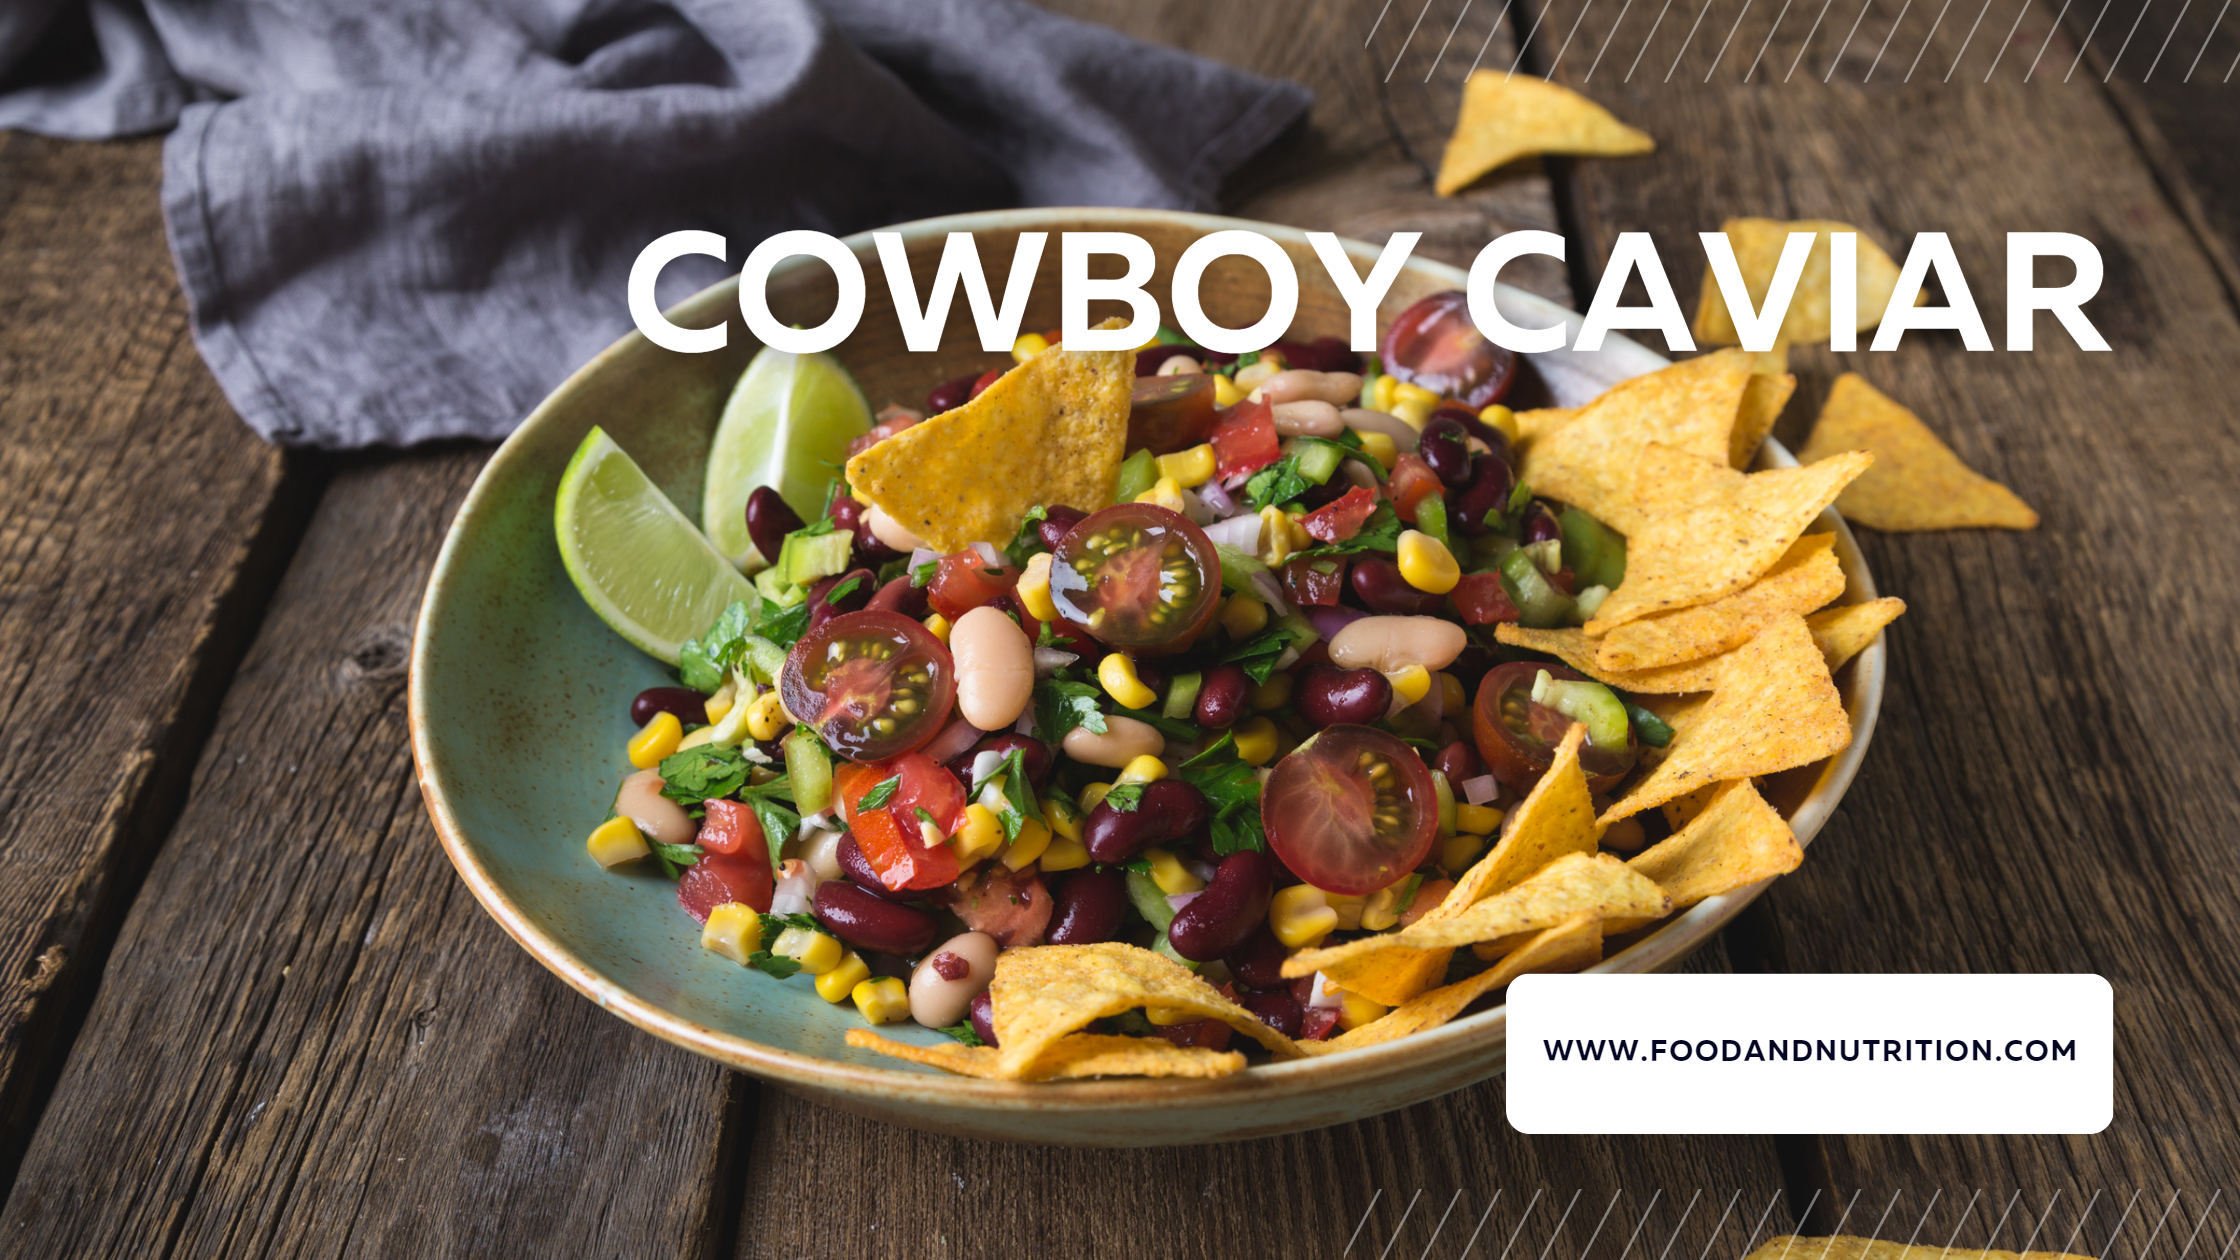 Healthy and Delicious: Why Cowboy Caviar is the Perfect Party Snack